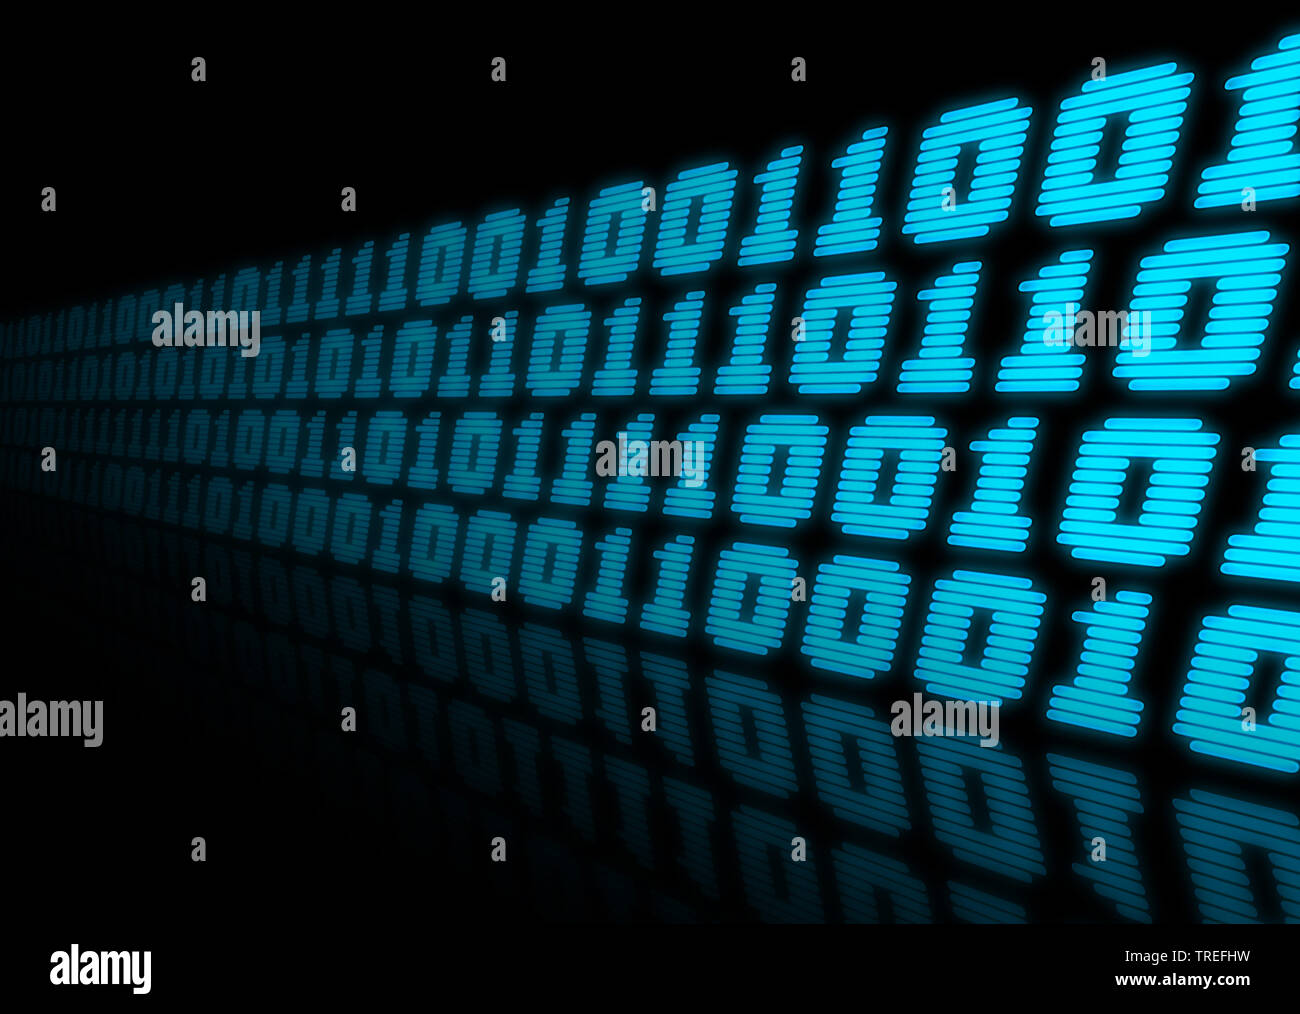 3D computer graphic, blue binary code against black background Stock Photo